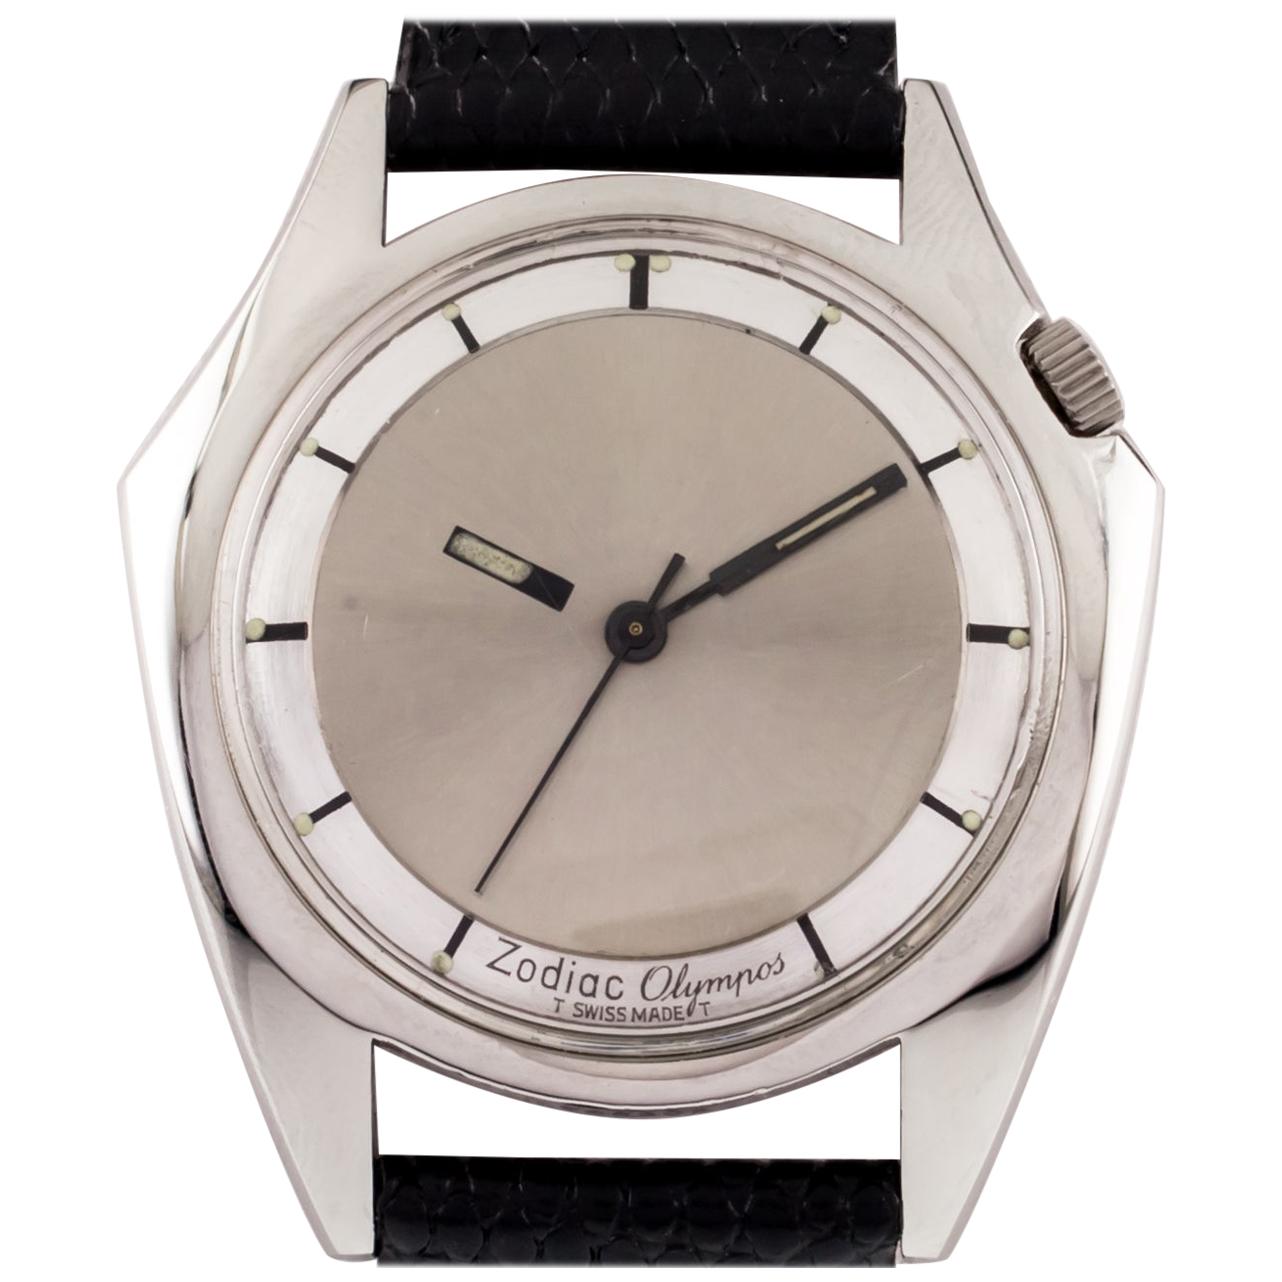 Zodiac Stainless Steel Olympos Automatic Watch w/ Mystery Dial and Leather Band